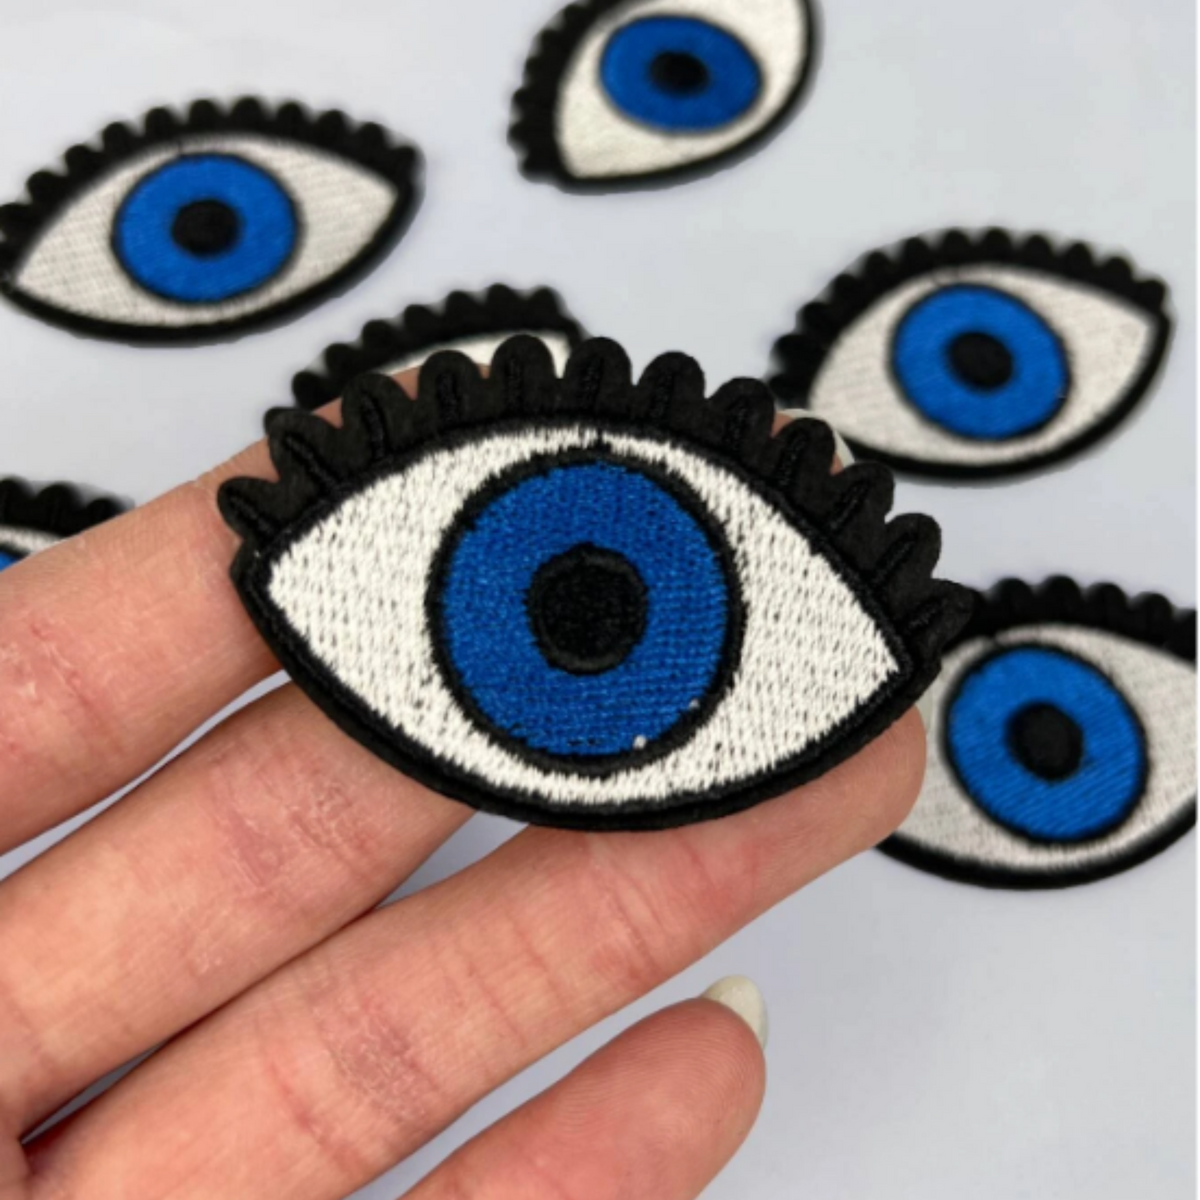 Navy Blue Evil Eye Patches - 2/pk – Ah! The Element of Surprise